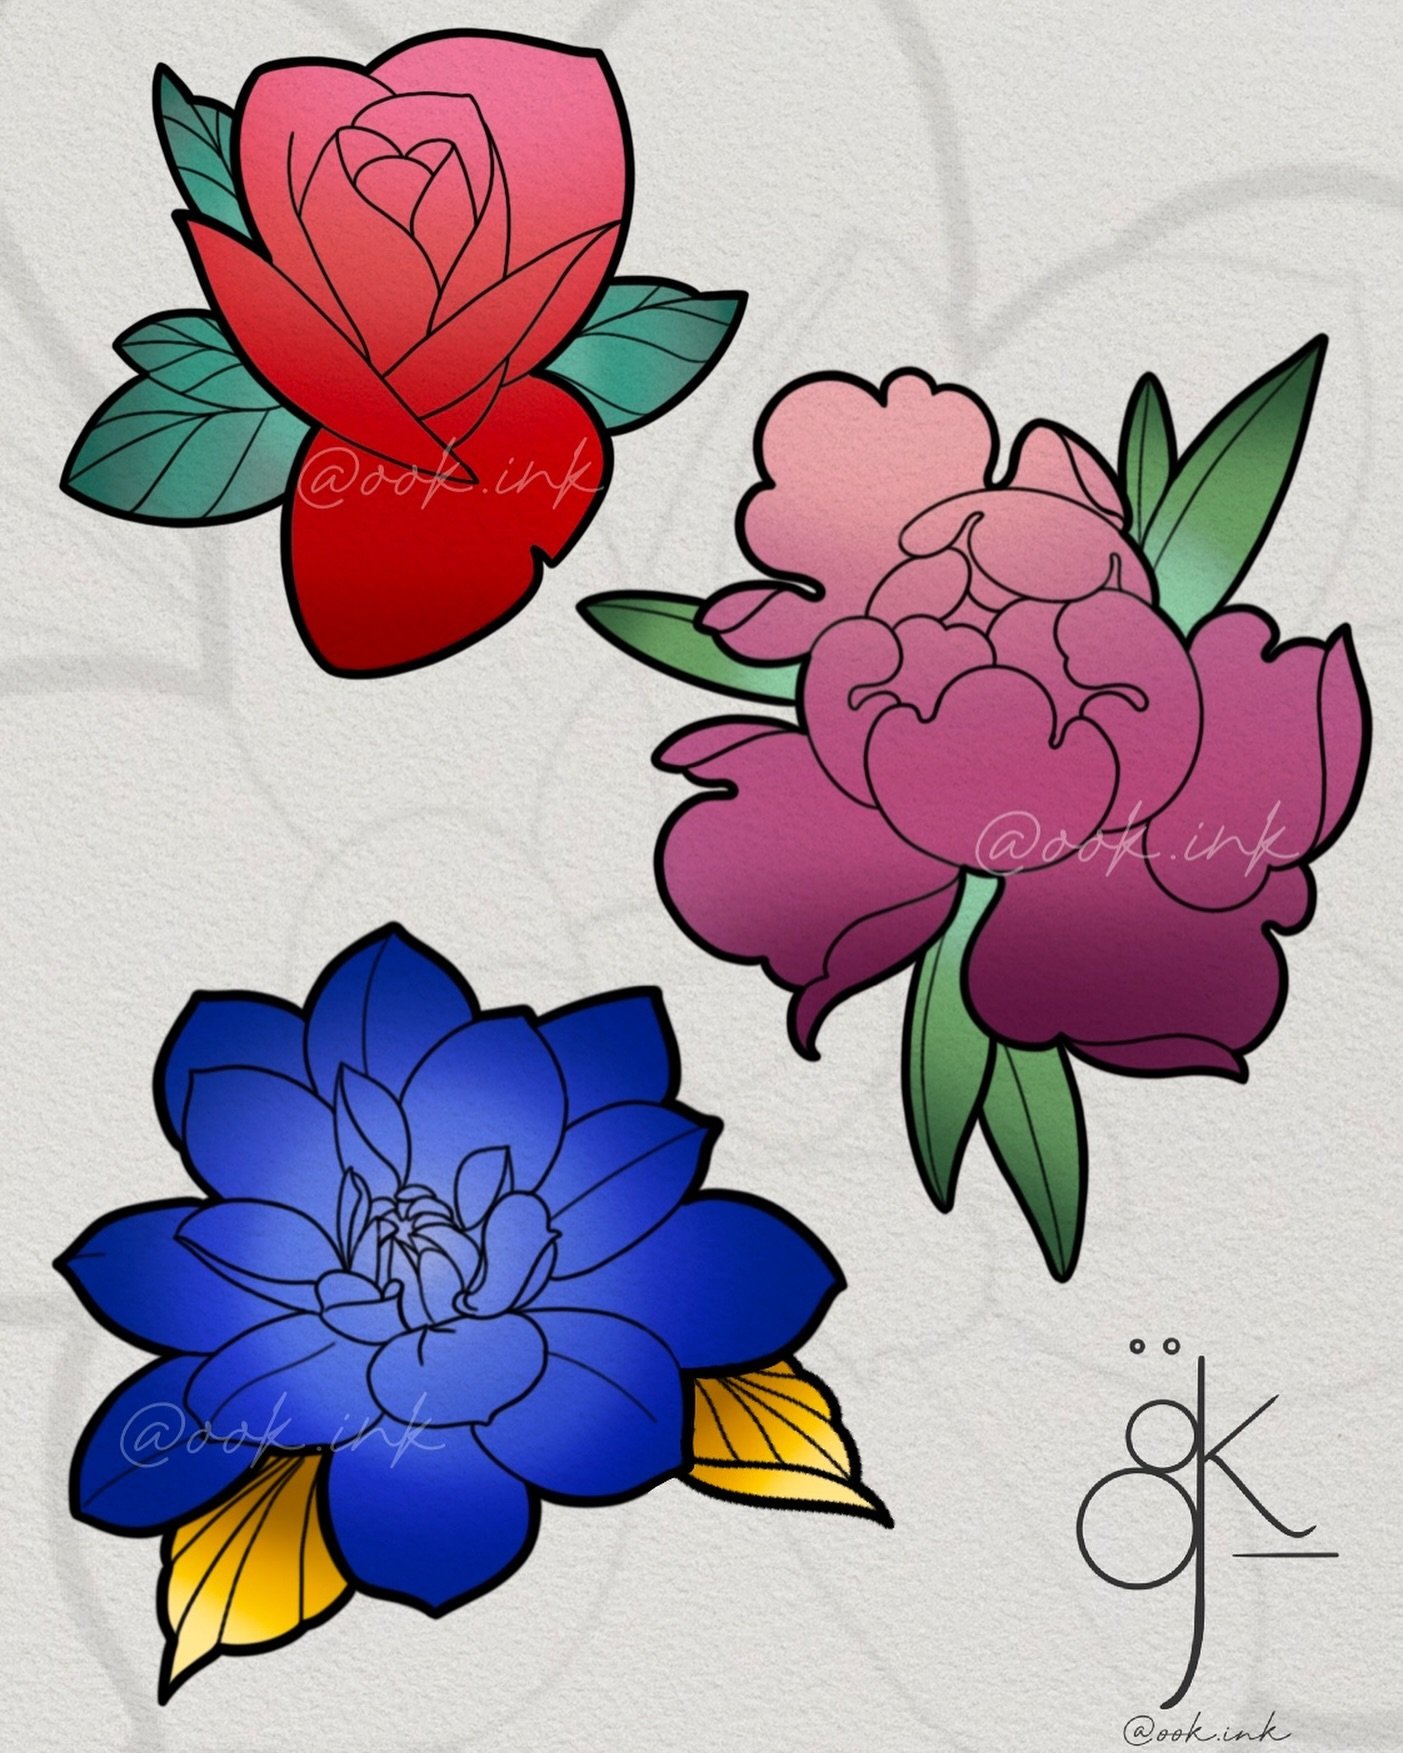 ✨New designs available ✨
$300 // $350
Not repeatable.
.
.
.
#nyctattoo #tattooflash #tattooart #flowertattoo #nyctattooartist #flashtattoo #colortattoo